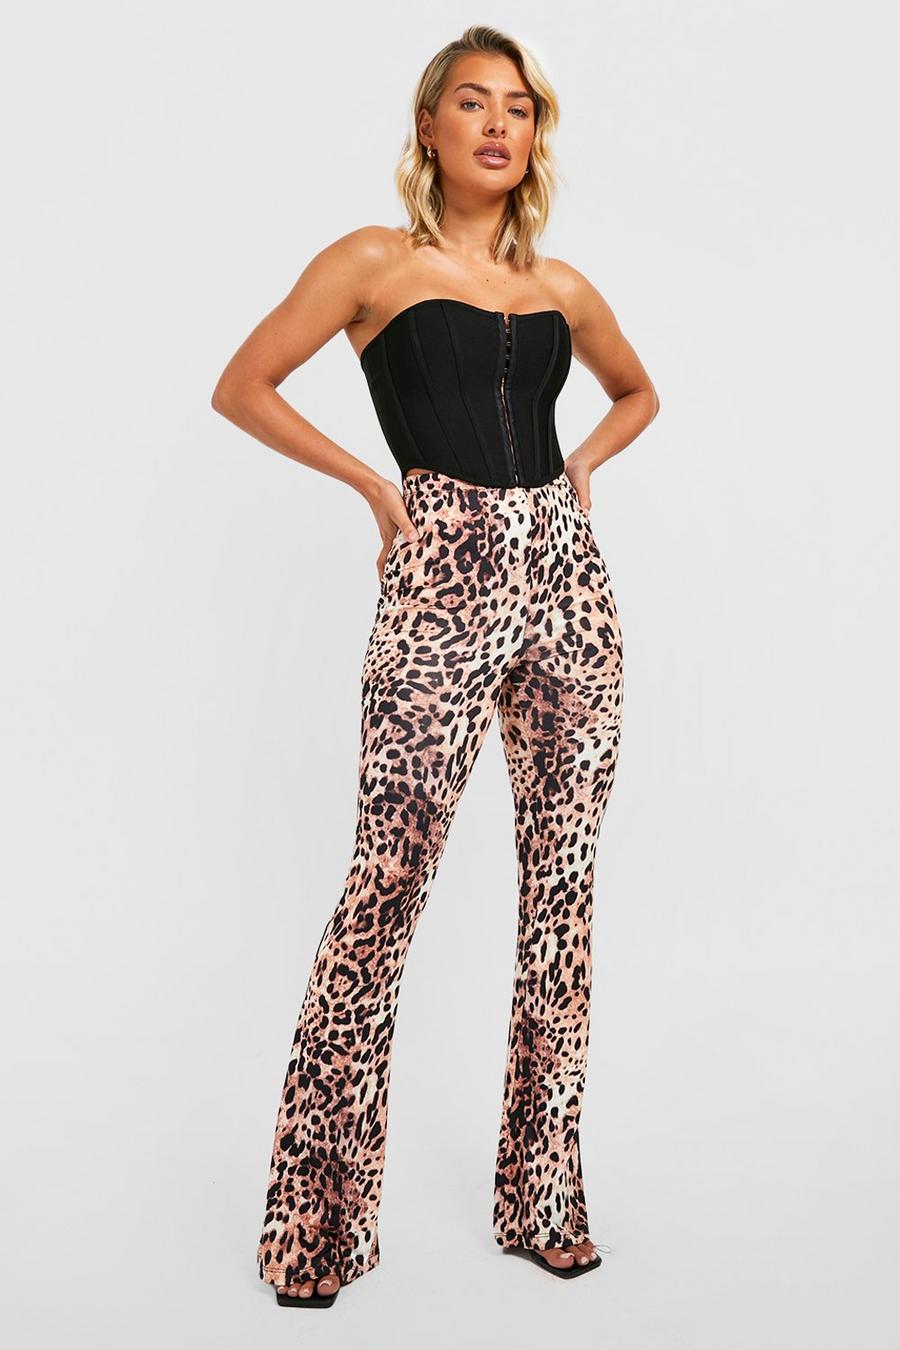 Tan Leopard Print Recycled Slinky Flared Pants image number 1